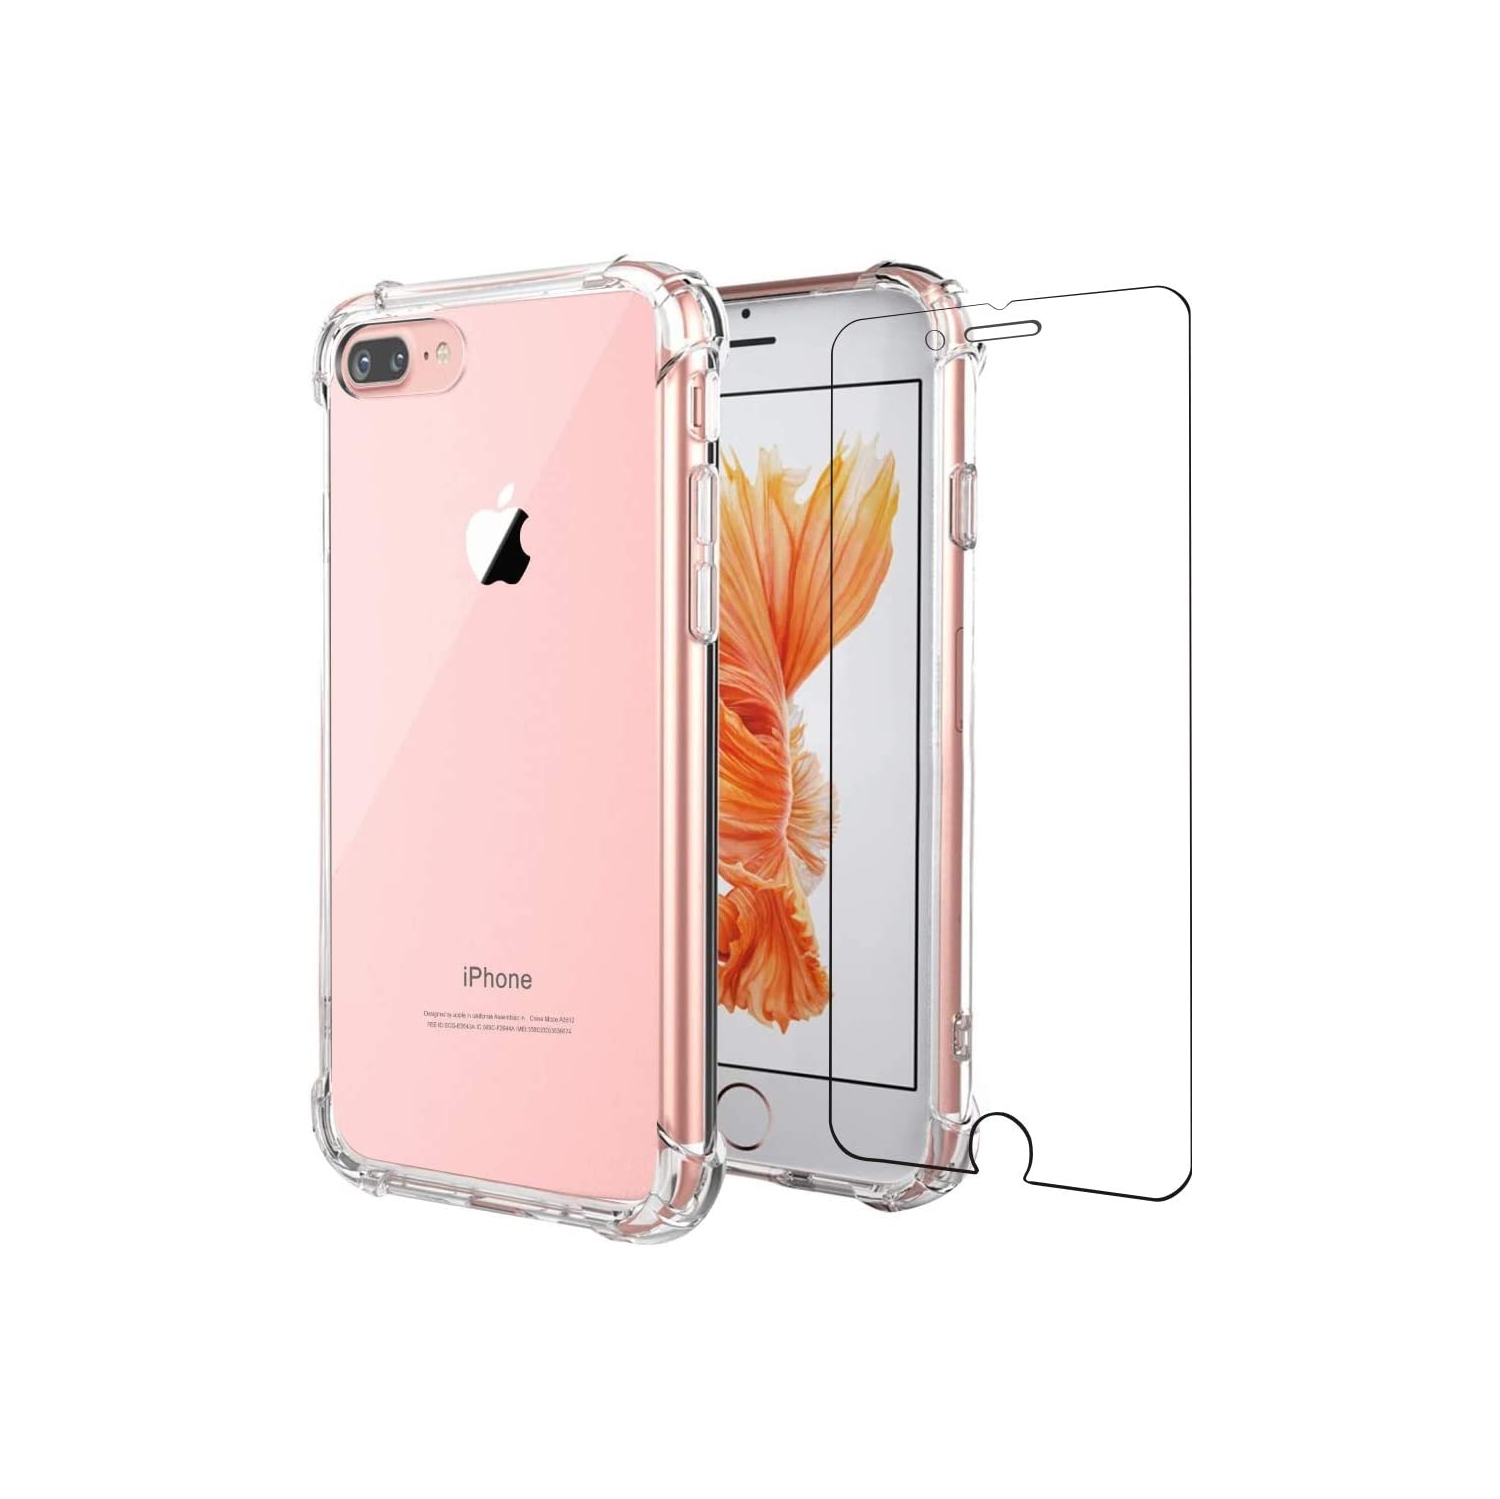 Compatible with iPhone 8 Plus Case, iPhone 7 Plus Case, iPhone 6/6s Plus Case, Screen Protector Slim Shock